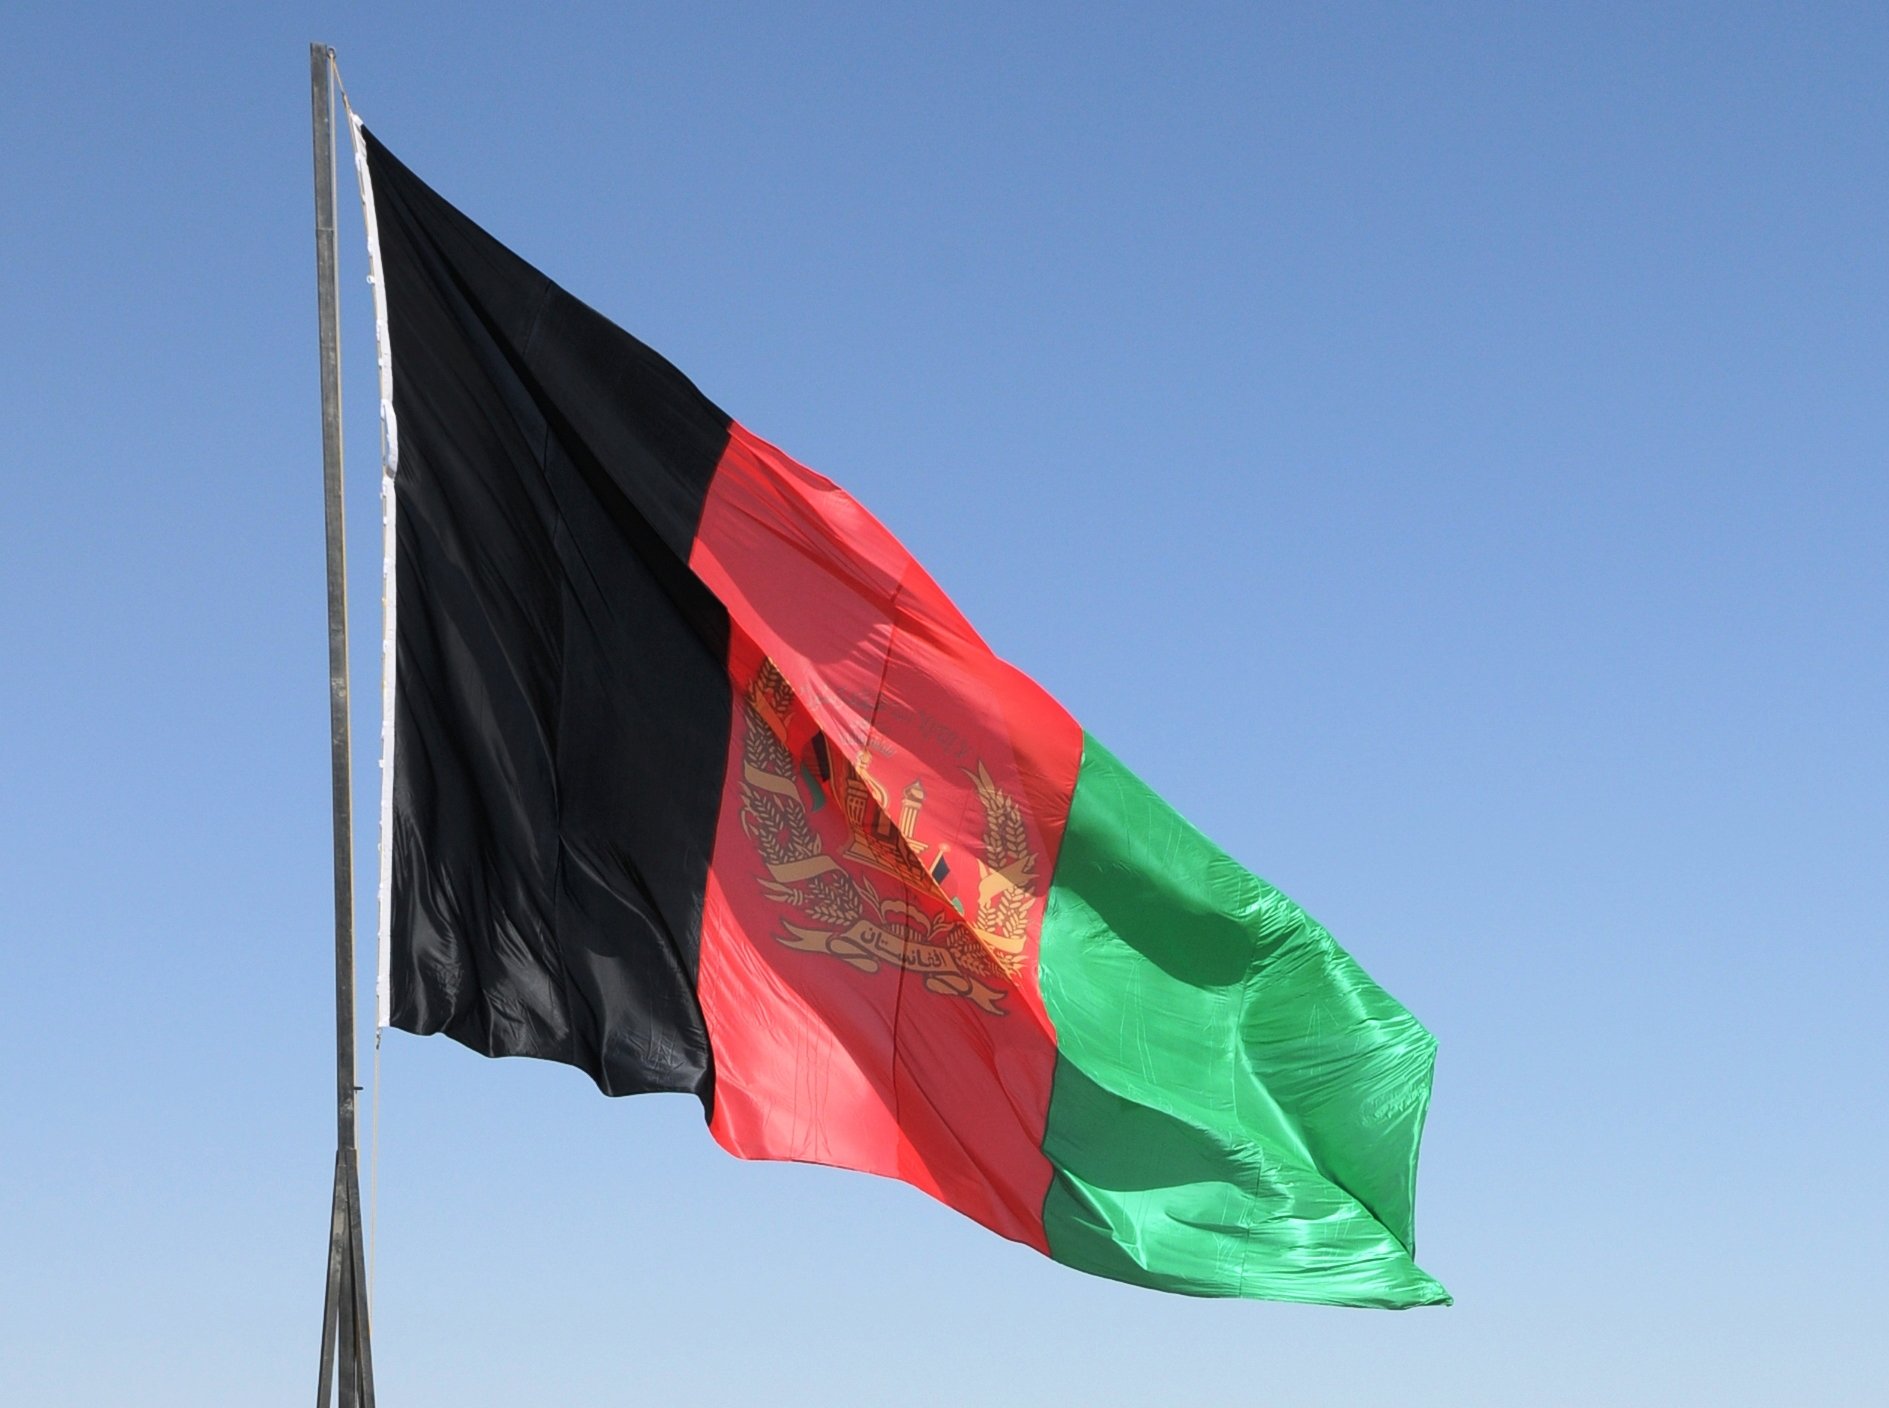 The Afghanistan national flag waves in the breeze during a ceremony in Sangsar, Sept 19, 2011. Sangsar is the former home of Taliban founder, Mullah Omar.